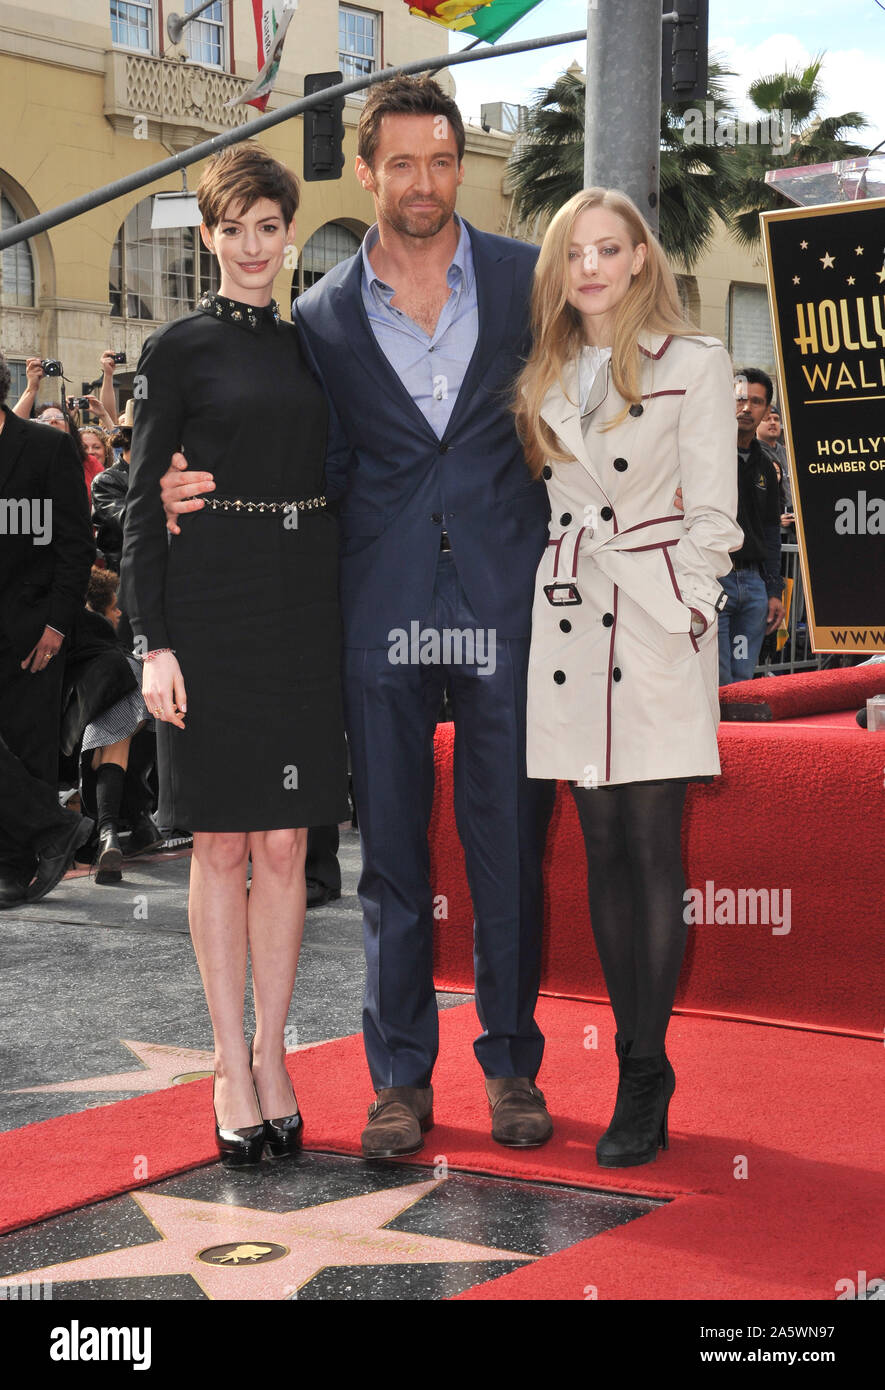 LOS ANGELES, CA. December 13, 2012: Hugh Jackman with his Les Miserable co-stars Anne Hathaway (left) & Amanda Seyfried. Jackman was honored with the 2,487th star on the Hollywood Walk of Fame. © 2012 Paul Smith / Featureflash Stock Photo